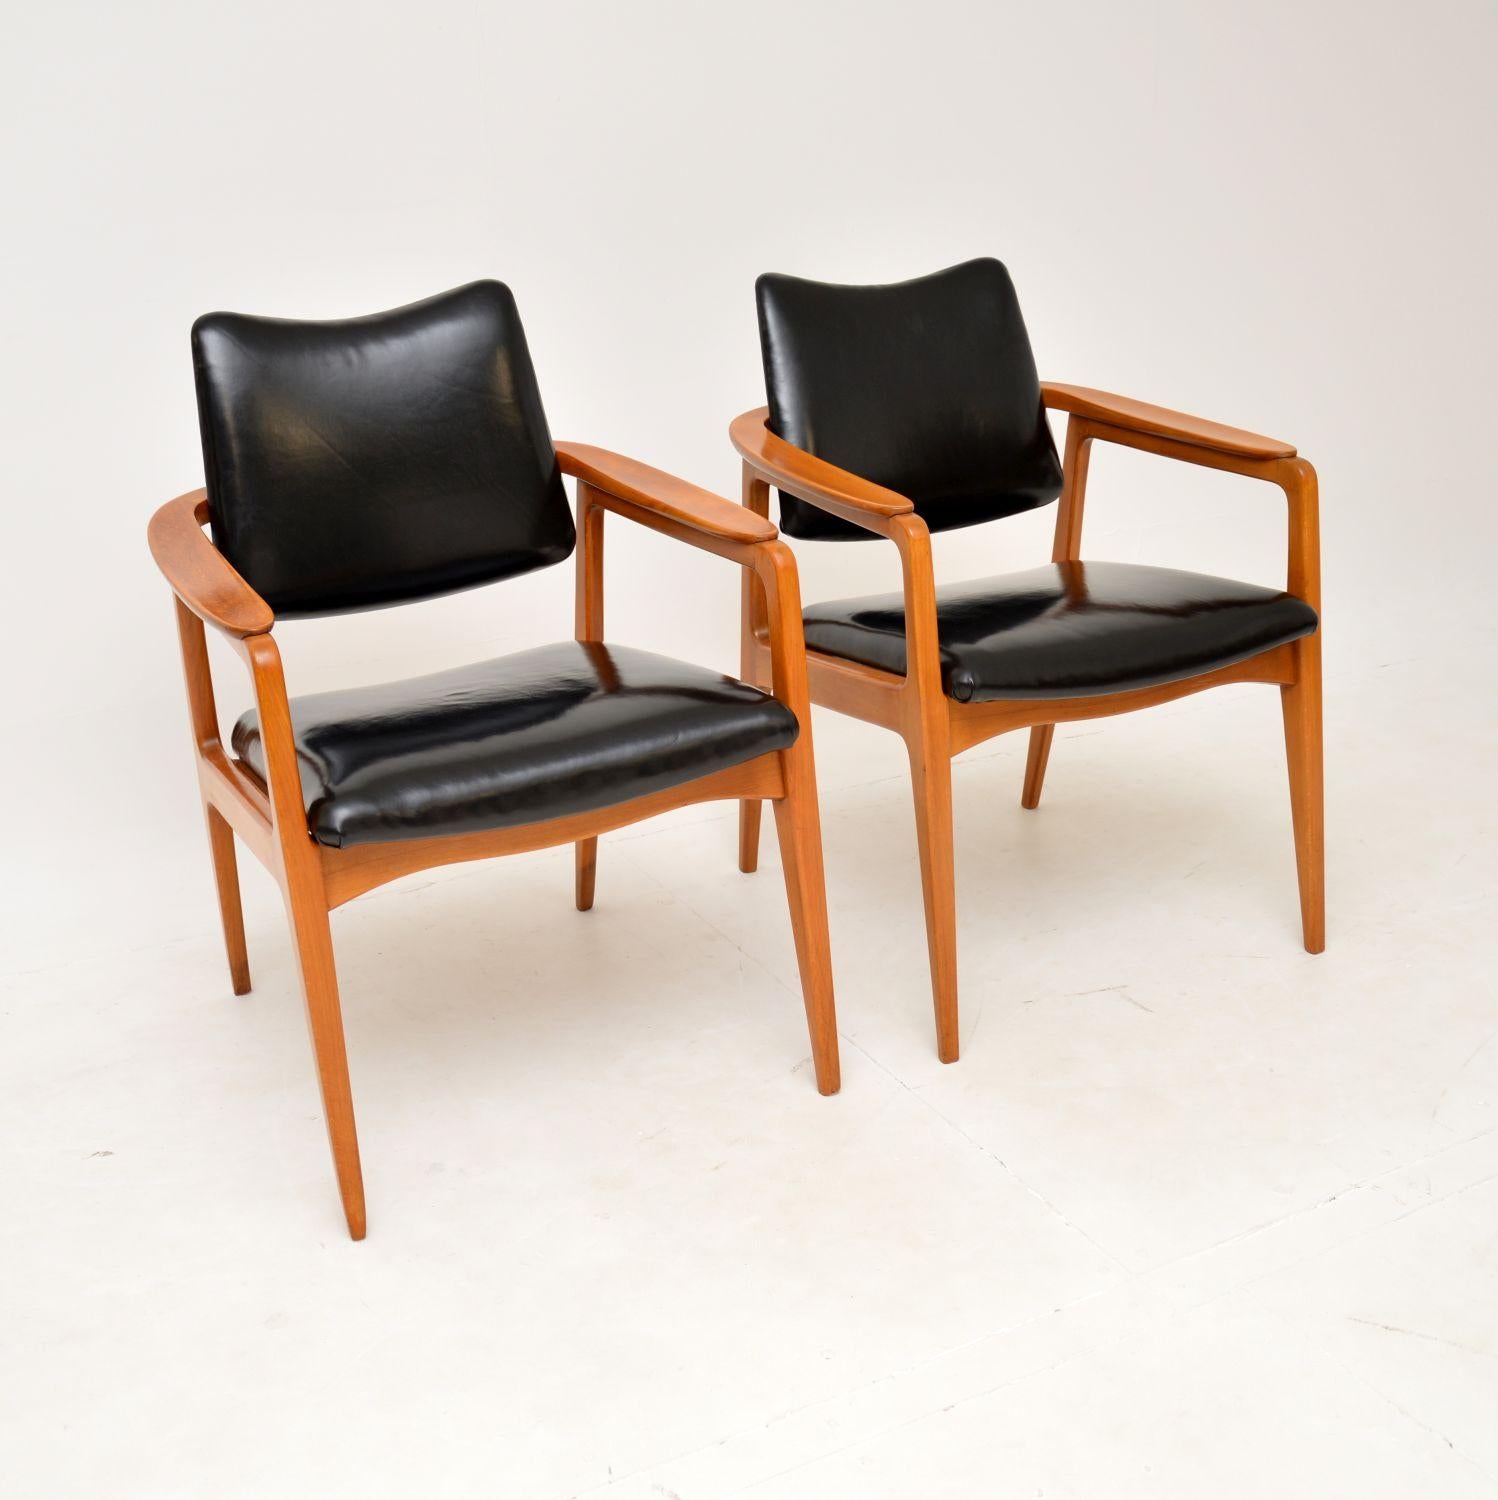 A stunning and very rare pair of vintage Danish armchairs in beech and leather. They were designed by Sigvard Bernadotte for France & Daverkosen in 1953, this pair dates from the 1950’s.

They are of superb quality and have a beautiful design,